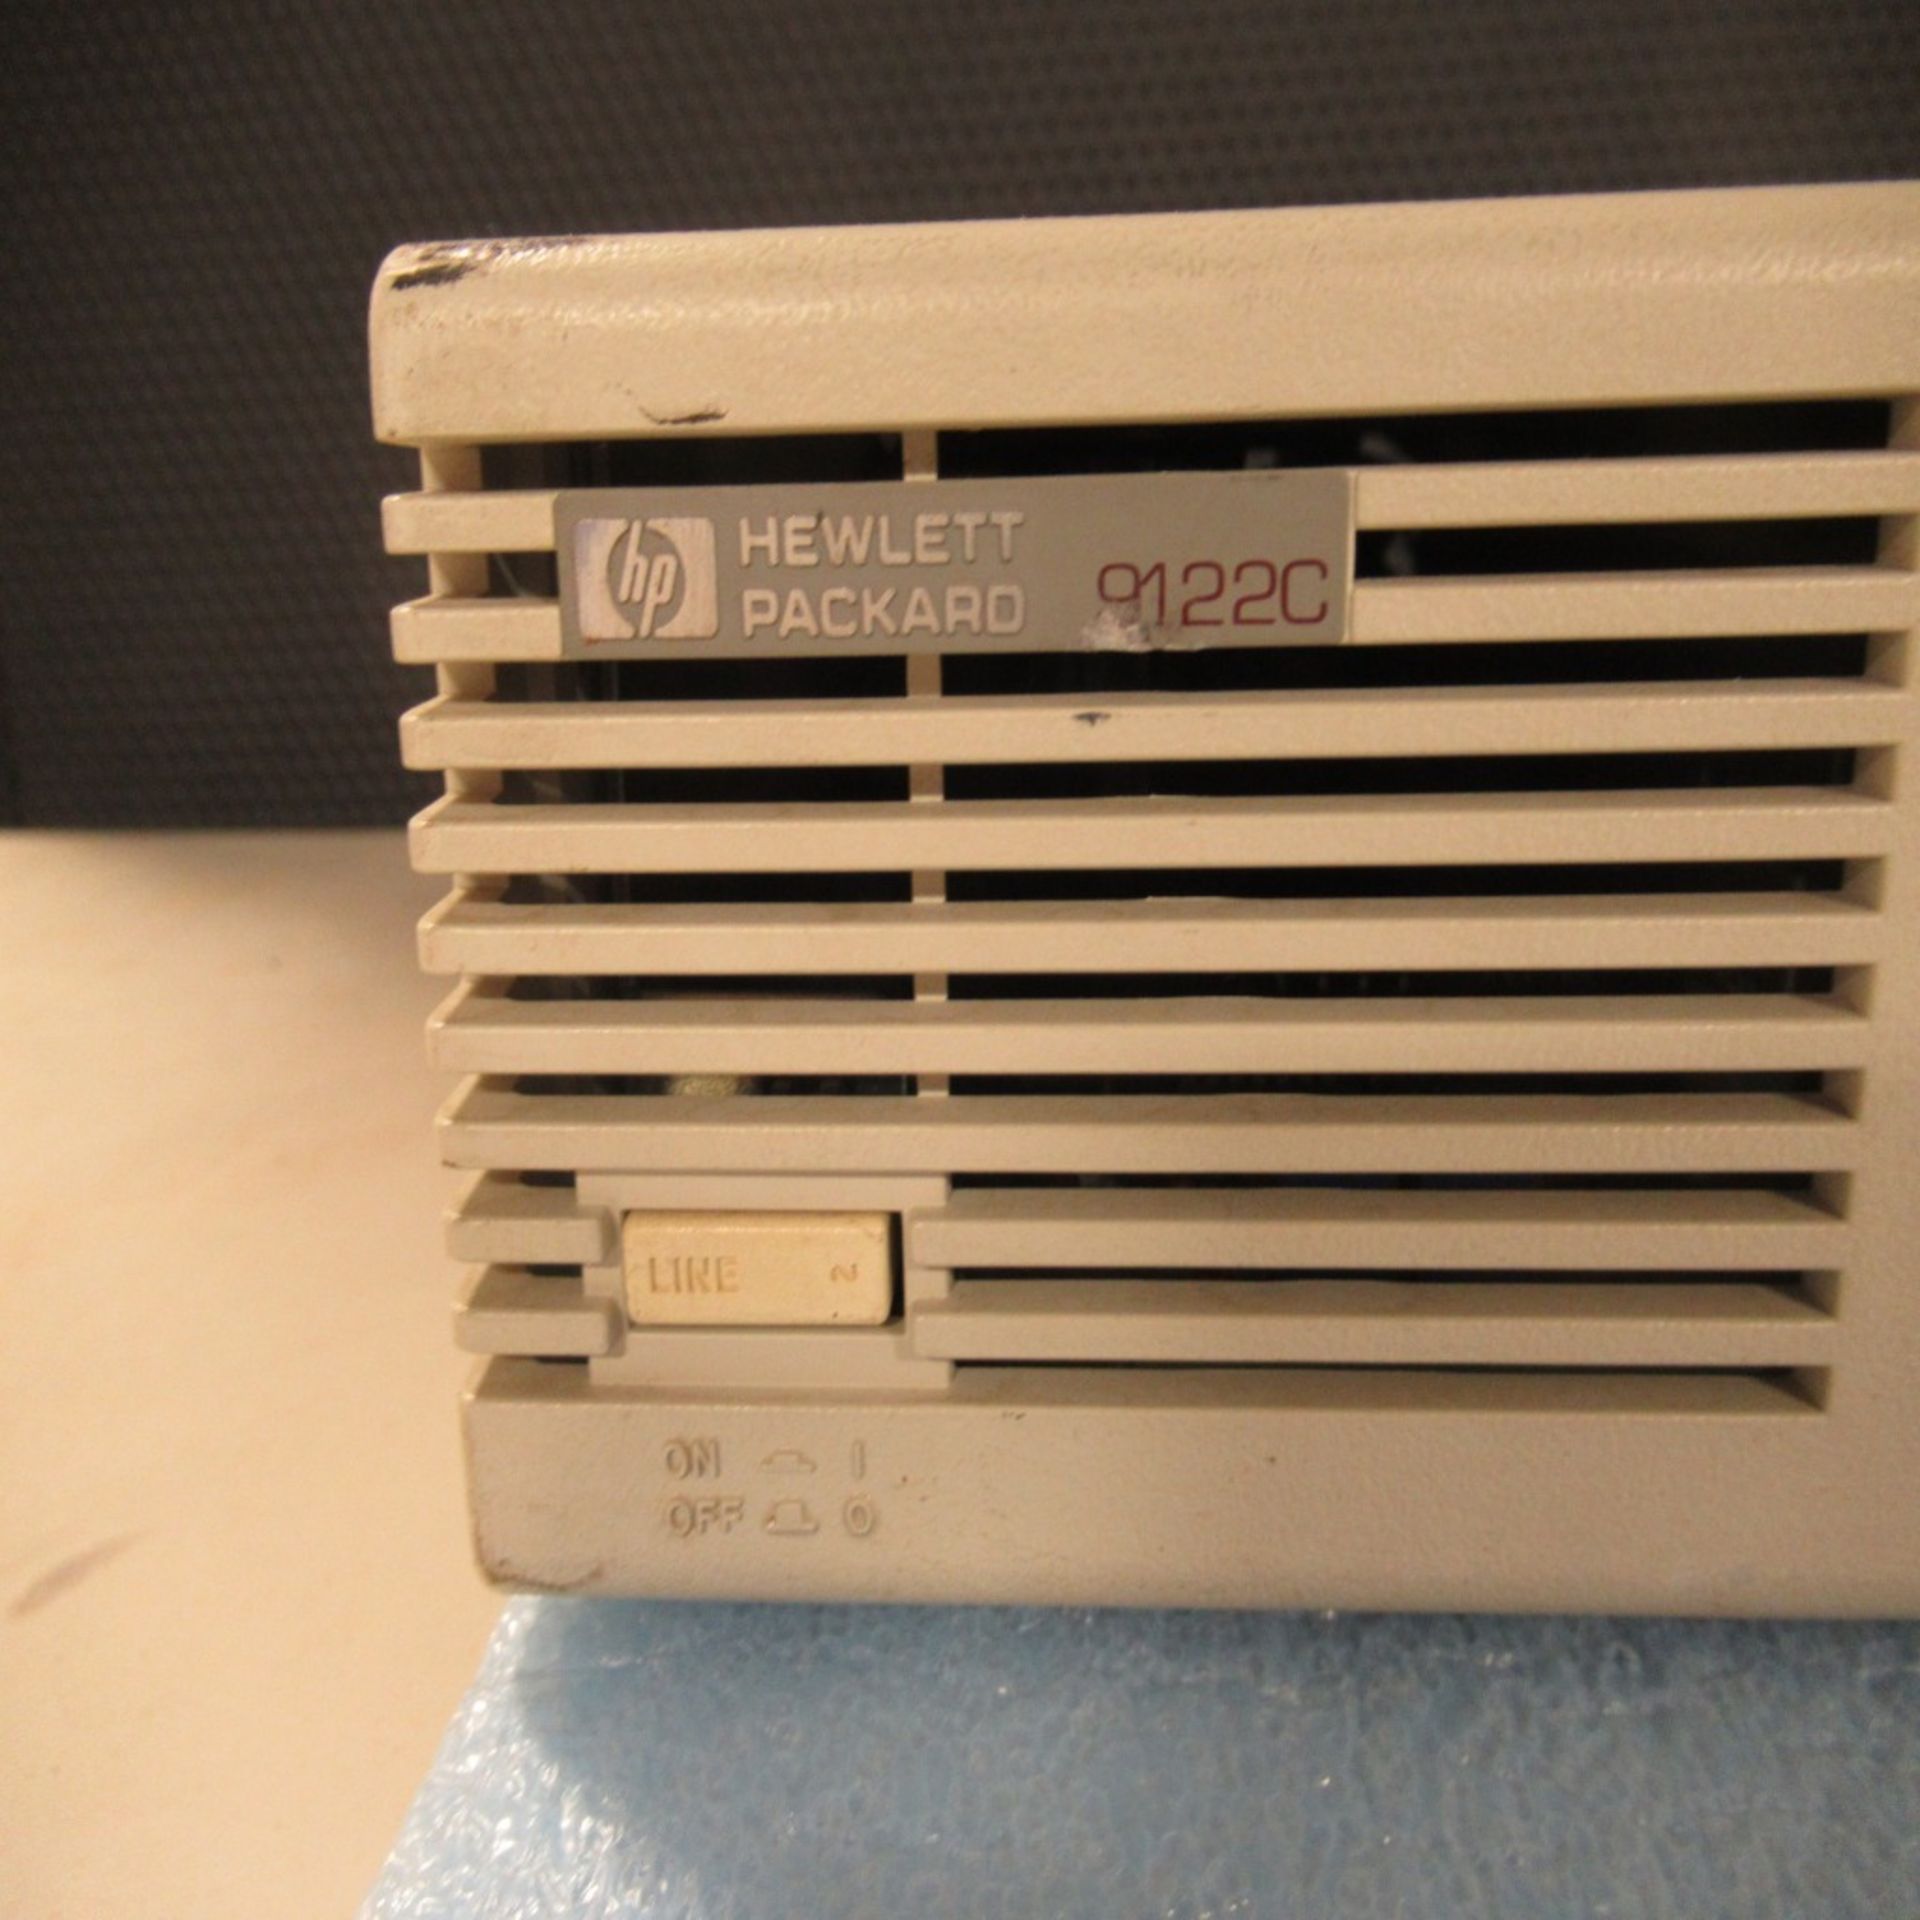 PHOTON SNAP SHOT MODEL 6000 *POWERS ON* NO SCREEN DISPLAY; FARNELL AP20-80 REGULATED POWER SUPPLY * - Image 205 of 222